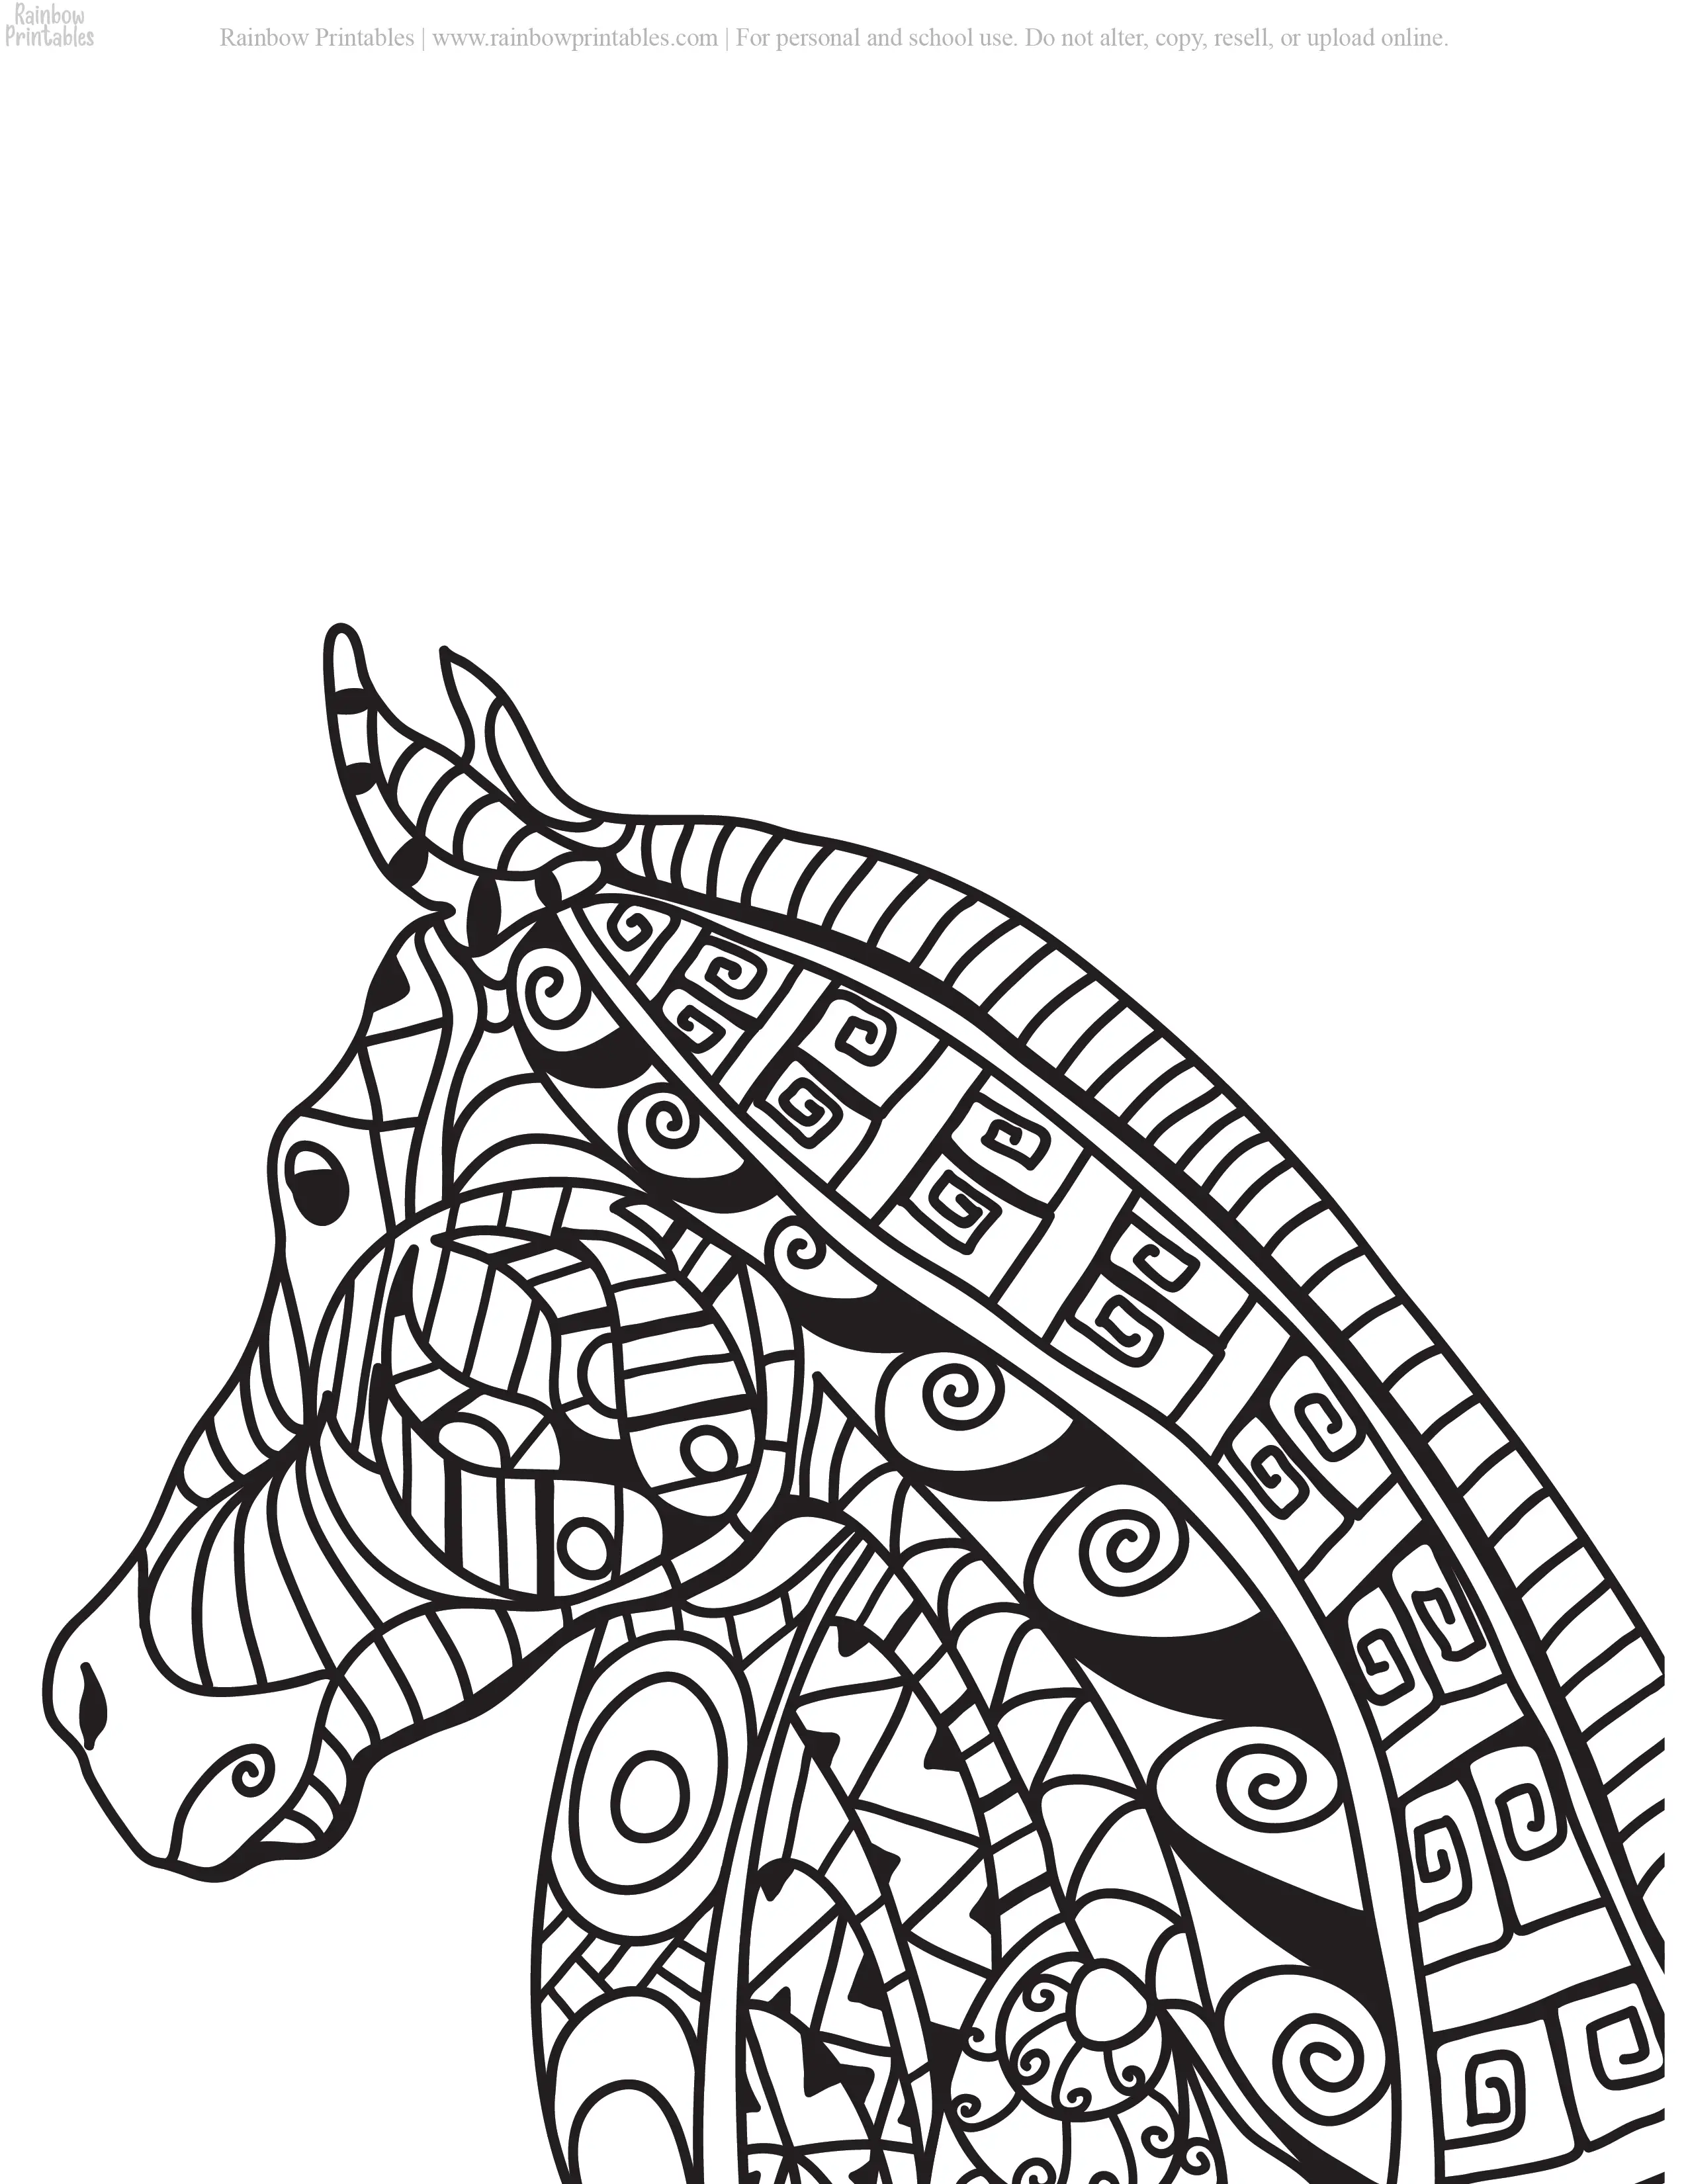 Printable Pages. Coloring Sheets PDF Horses Mandala Coloring Pages For Kids